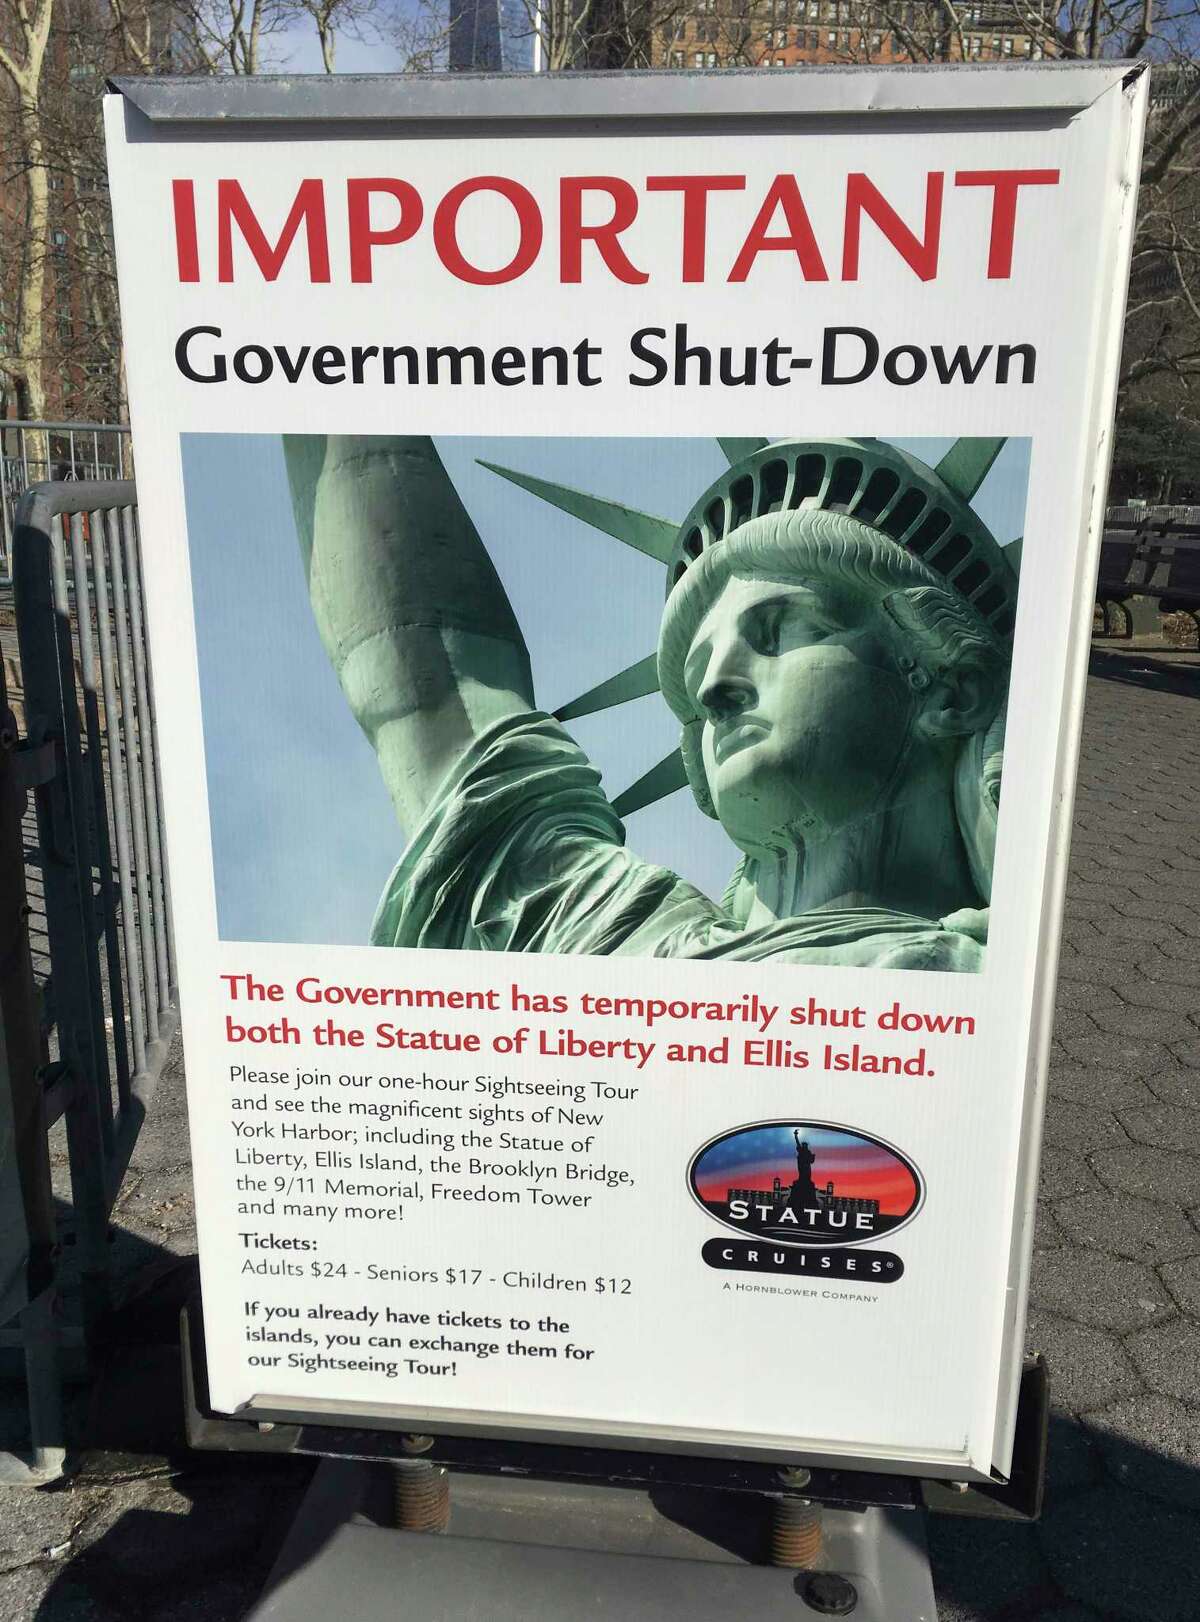 The sign at the Ellis Island ferry cue informs visitors that there was no access to the island or to the Statue of Liberty, due to the government shutdown, Saturday, Jan. 20, 2018 in New York. When a dispute in Congress over spending and immigration forced scores of federal government agencies and outposts to close their doors, the Statue of Liberty and Ellis Island had to turn away visitors, due to what the National Park Service described as "a lapse in appropriations." (AP Photo/Ted Shaffrey)